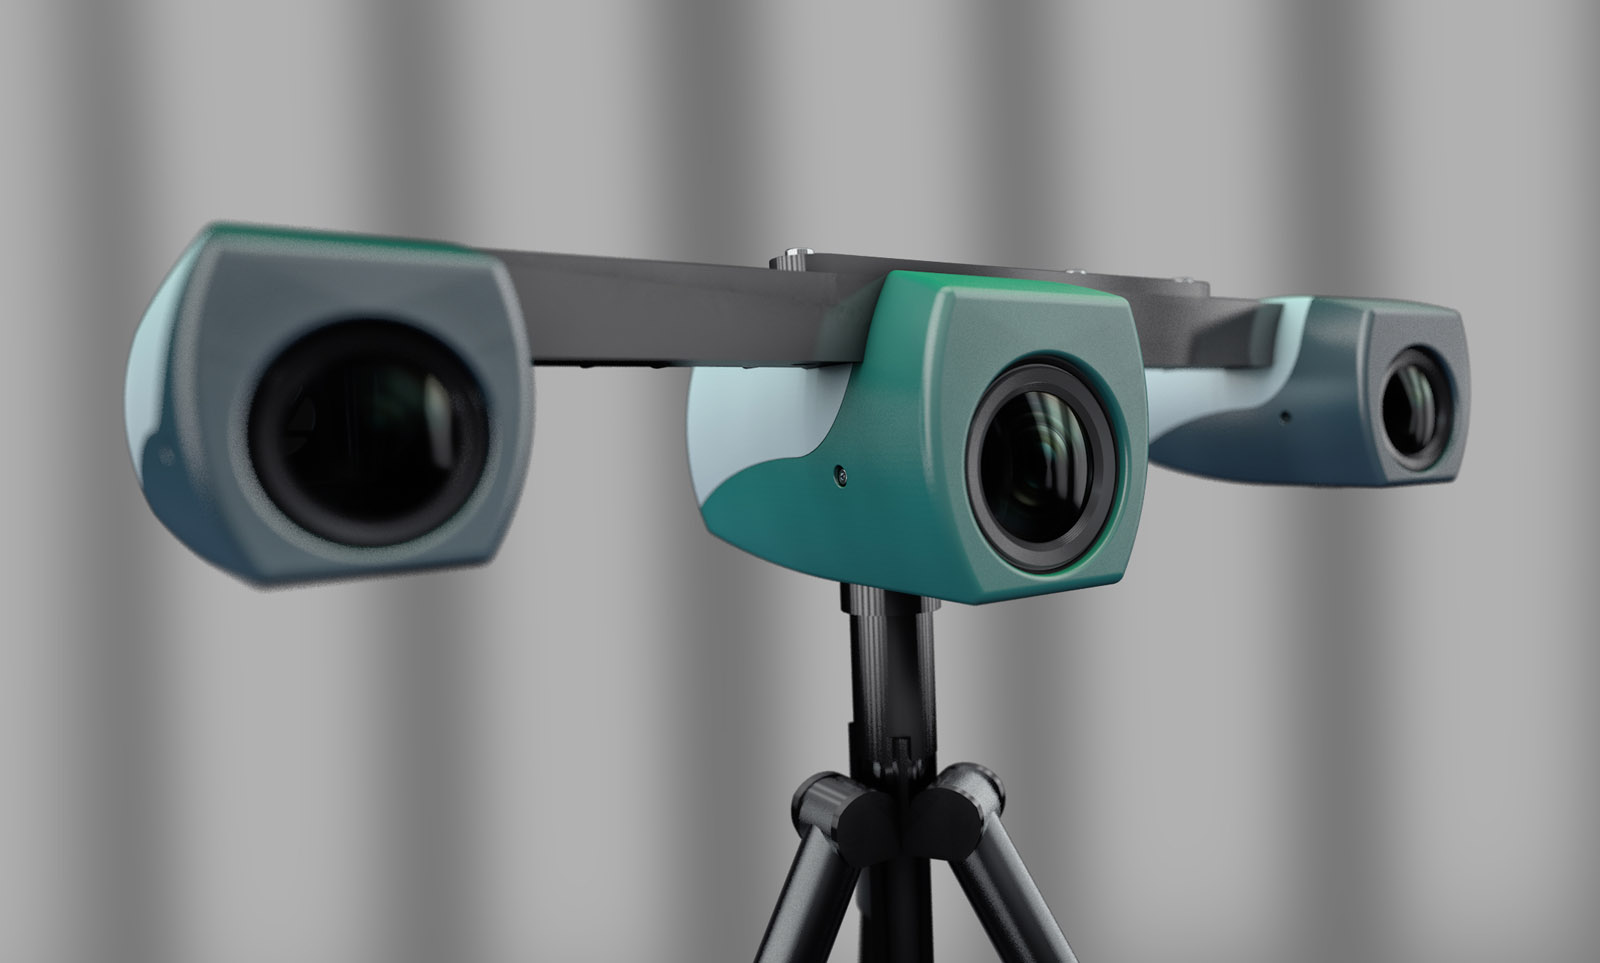 3D sensor technology: two high-speed cameras and a gobo projector capture the 3D data of the moving person.